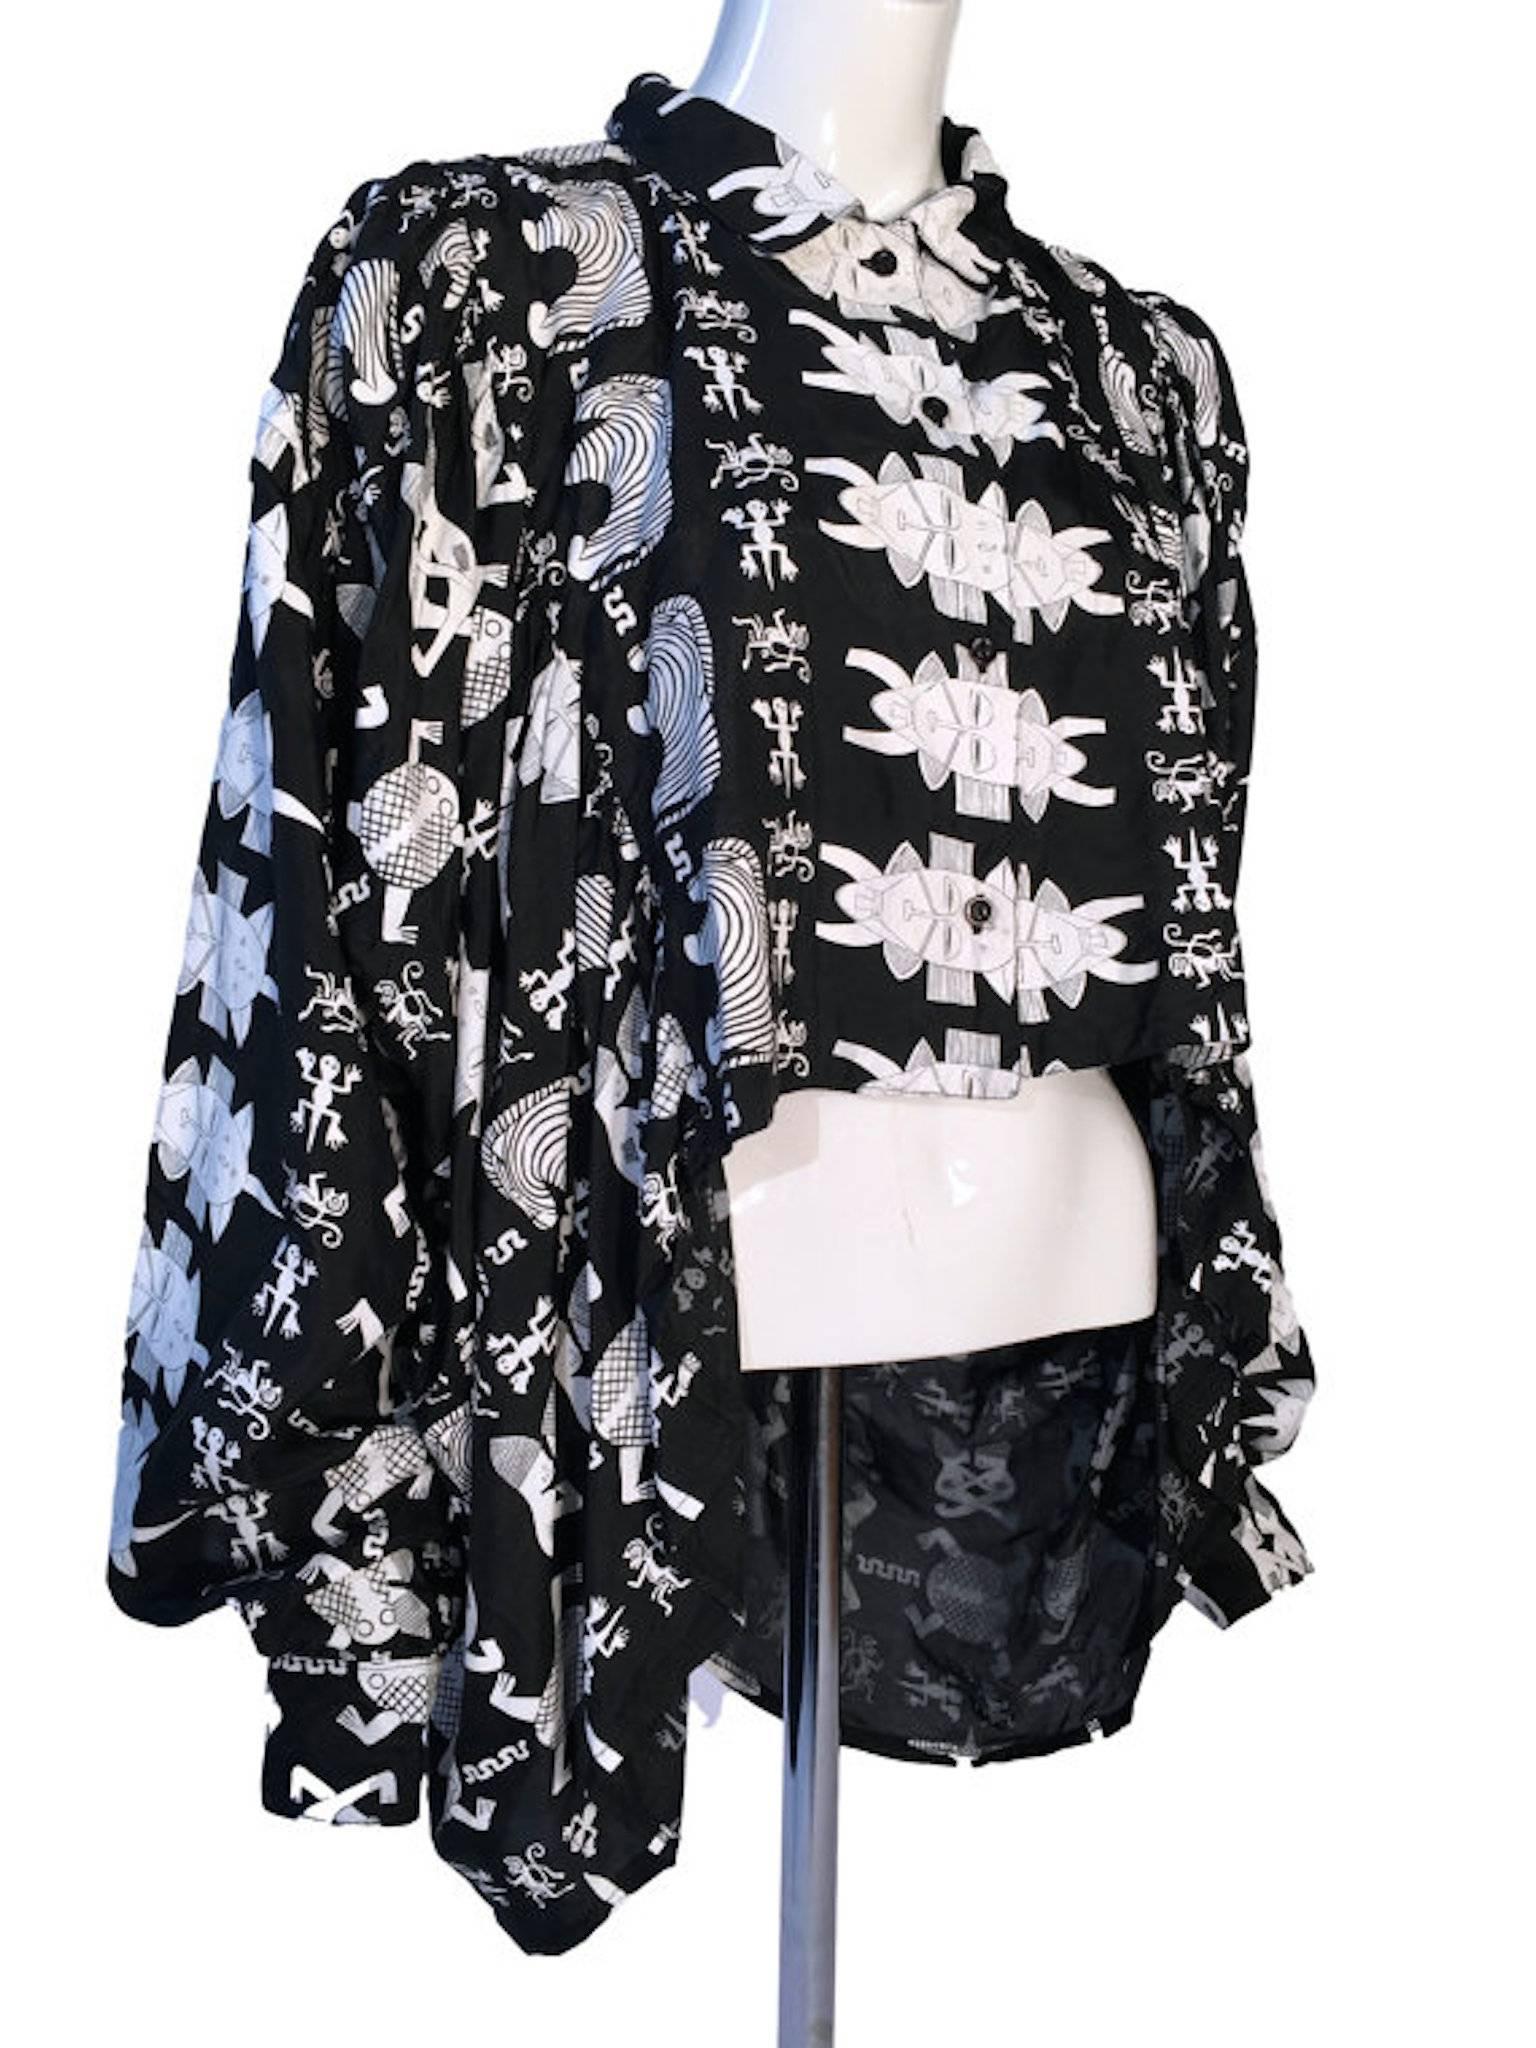 A rare Barbara De Vries Giraf black & white 100% silk cropped front batwing blouse. With tiki print, button front fastening. Fabulous cut with a manteau cape style effect. Sleeves have flitted buttoned cuffs.

Size UK 8/10, 14 inches across